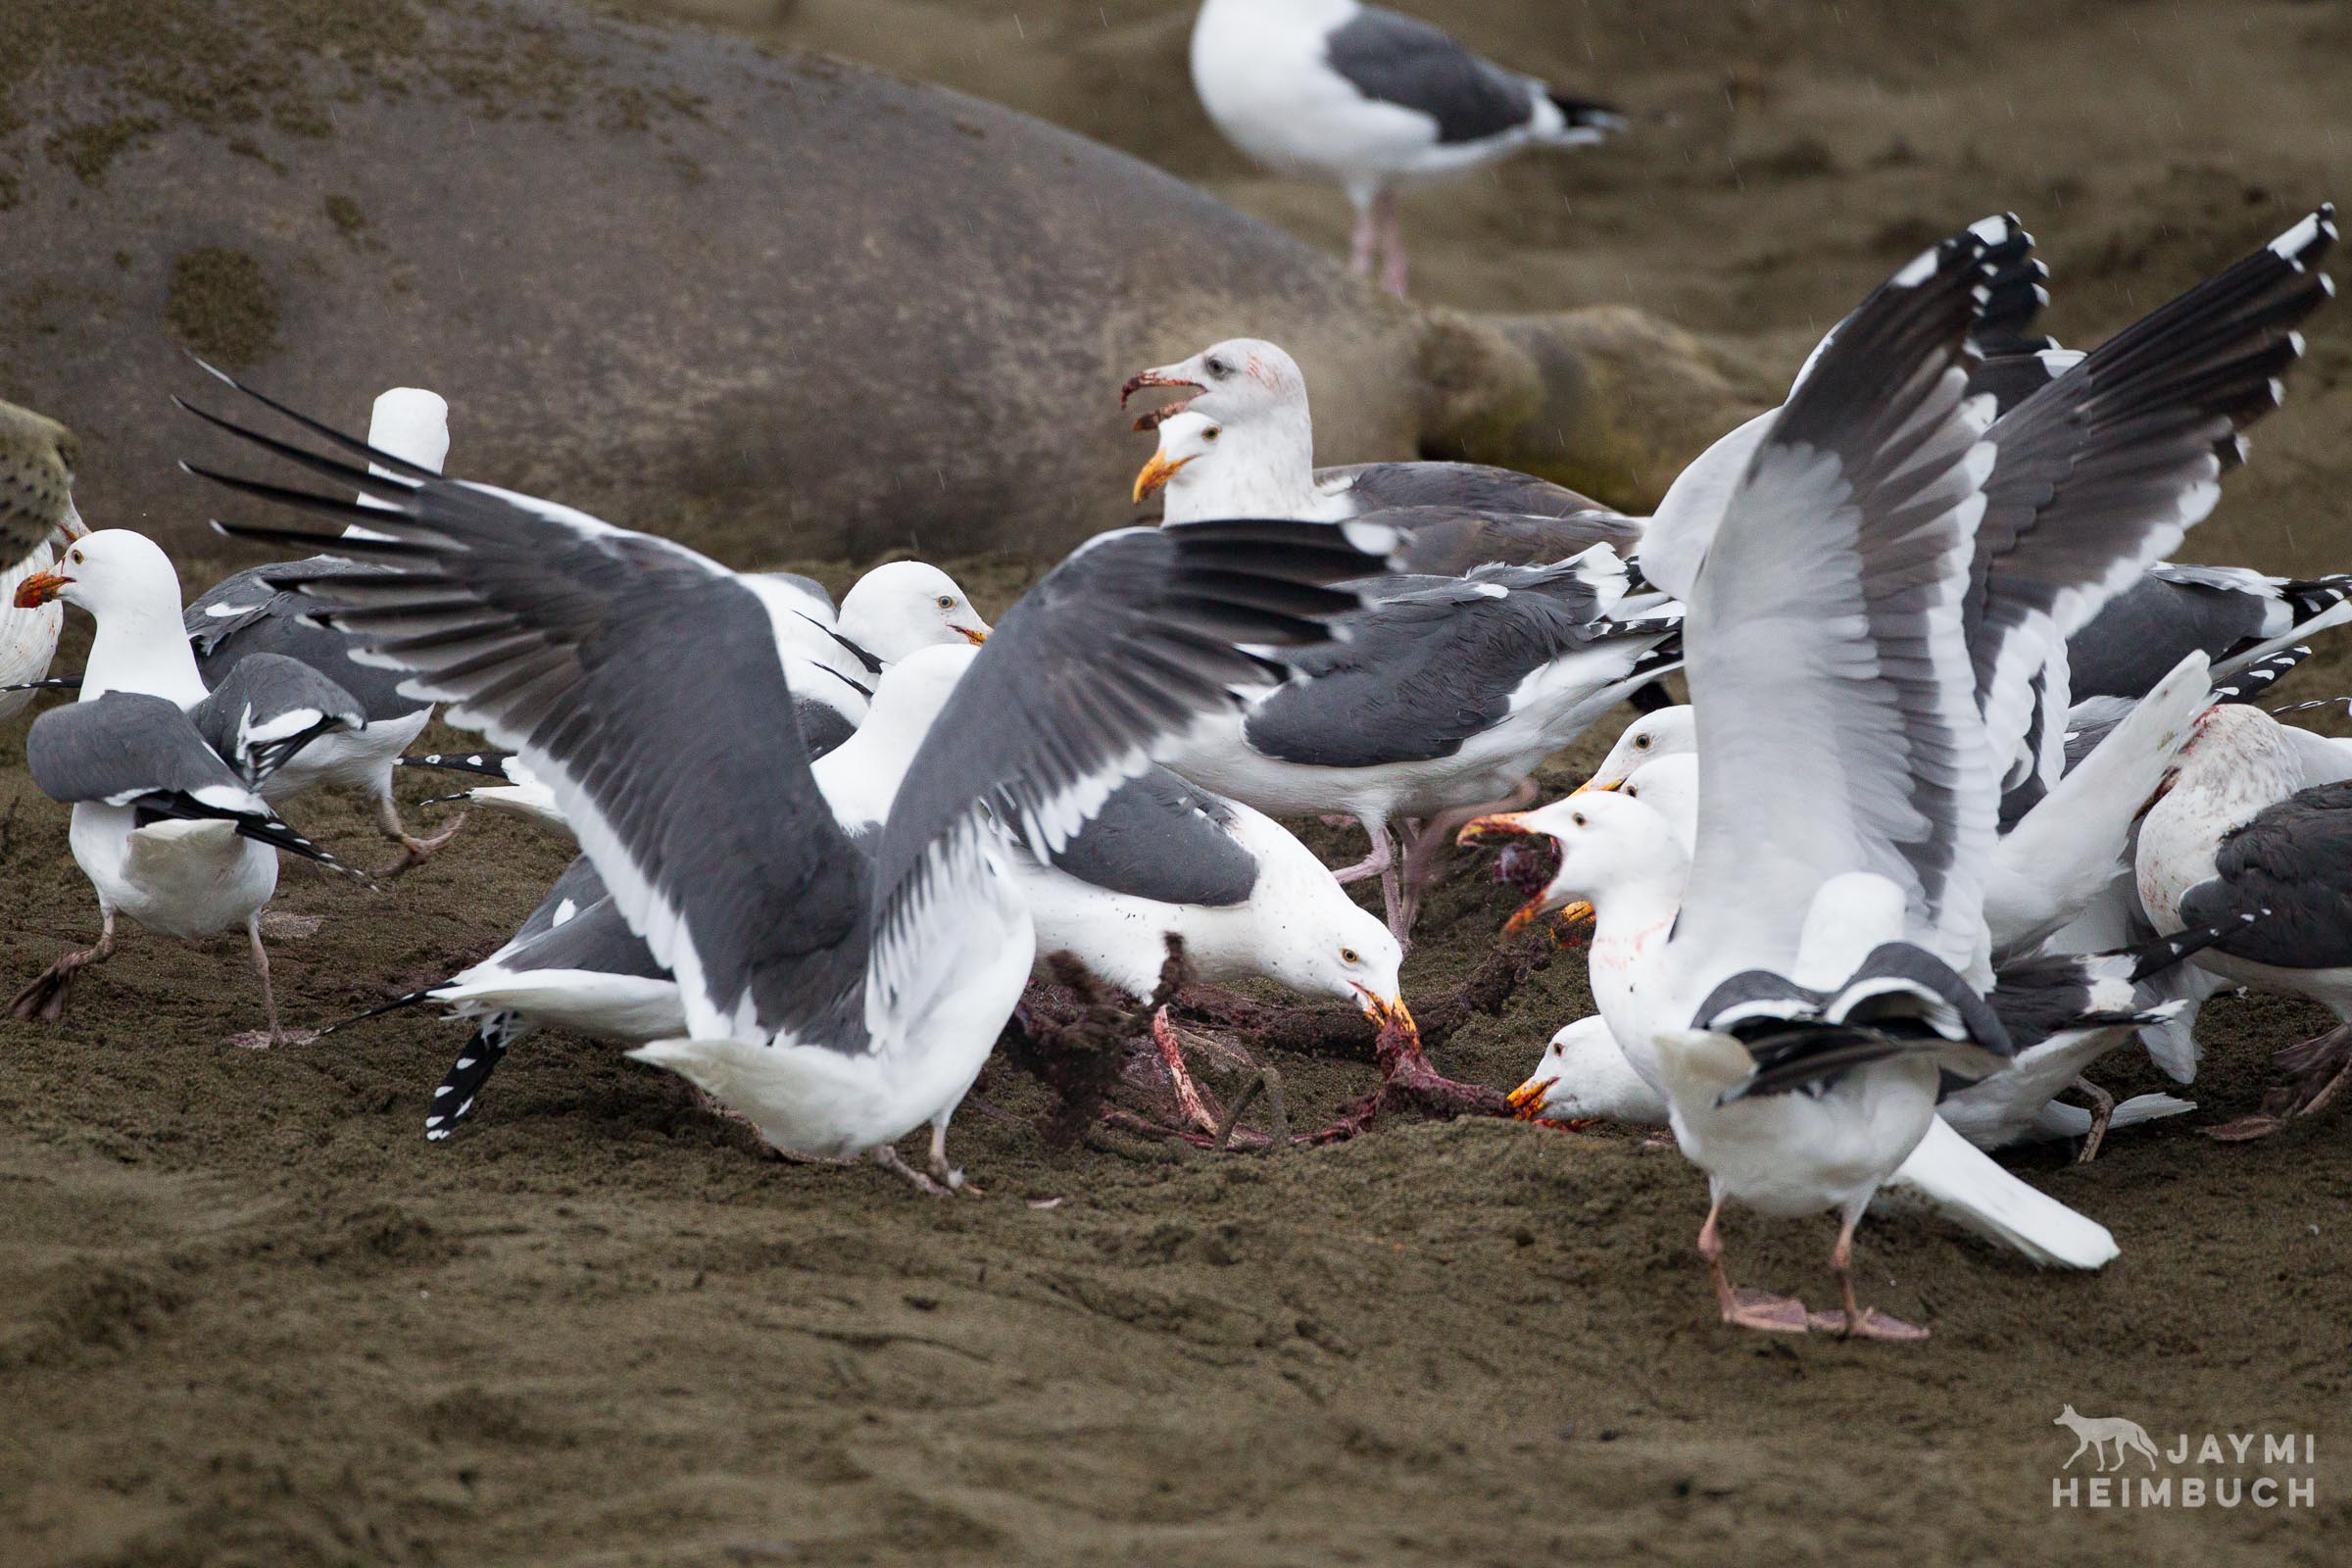 Western gulls eat the placenta after a northern elephant seal (Mirounga angustirostris) gives birth